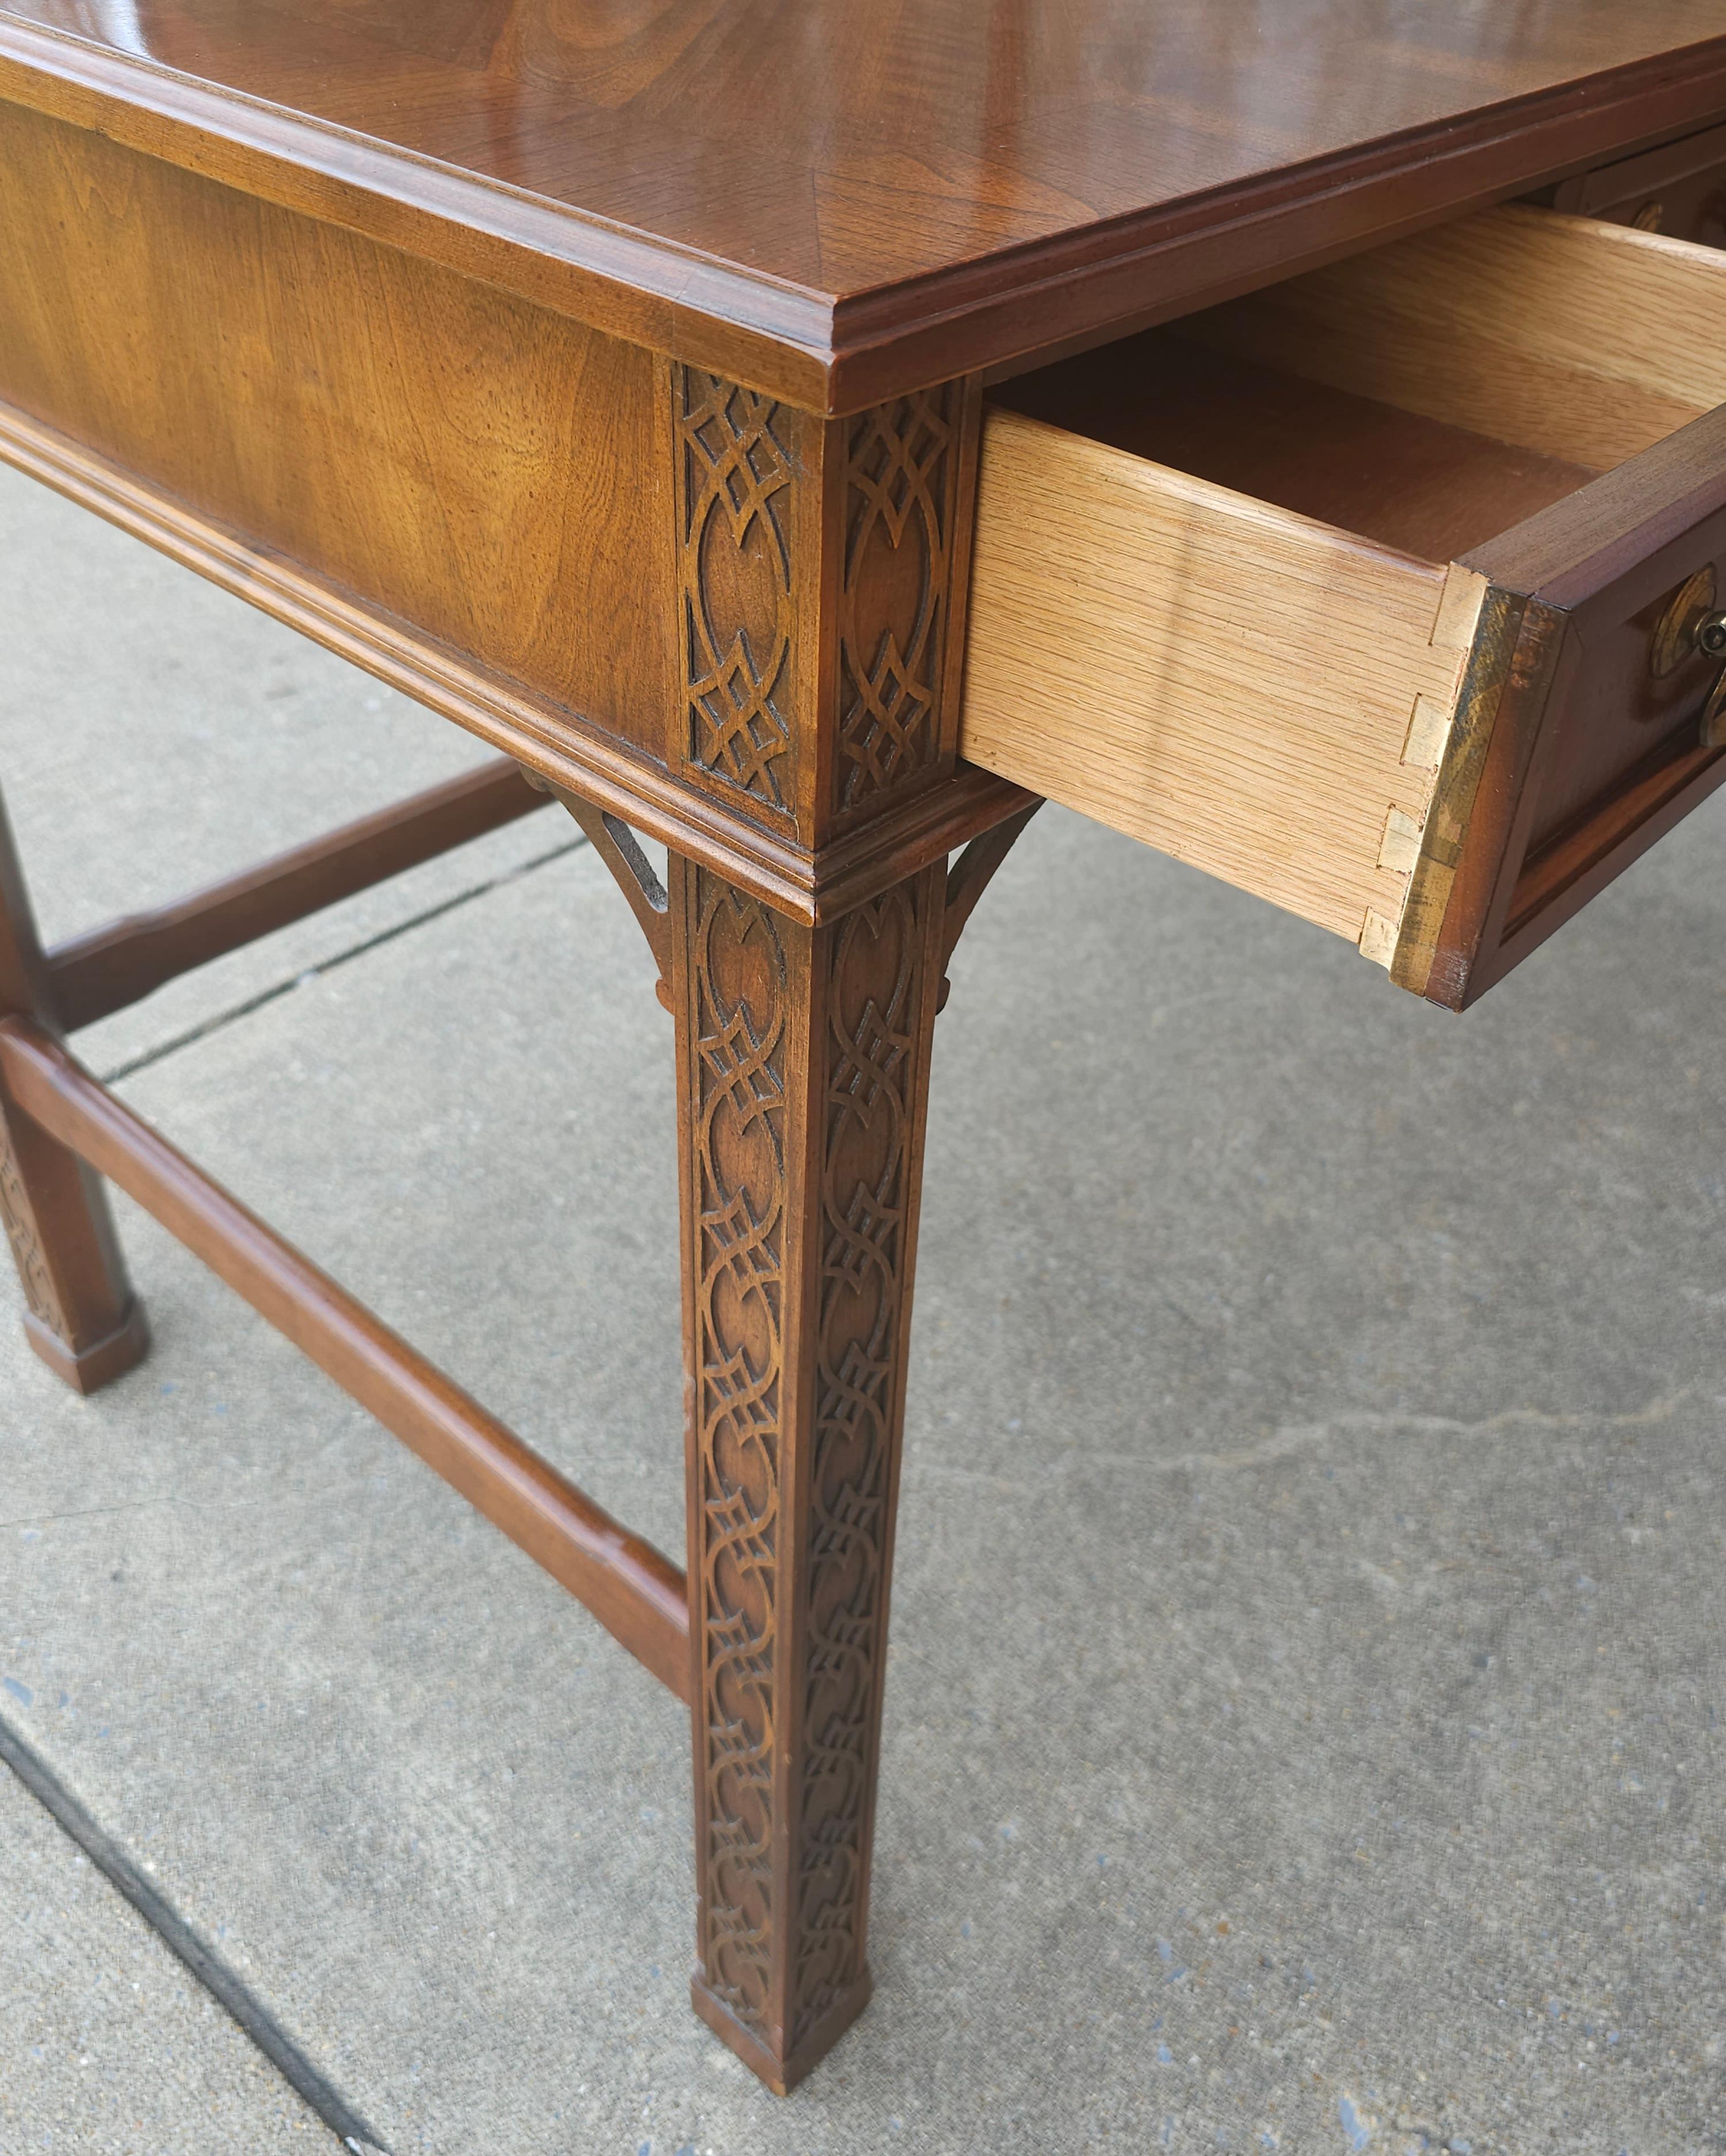 George III Style Blind Fretwork Mahogany Table Desk w/ Gallery For Sale 3